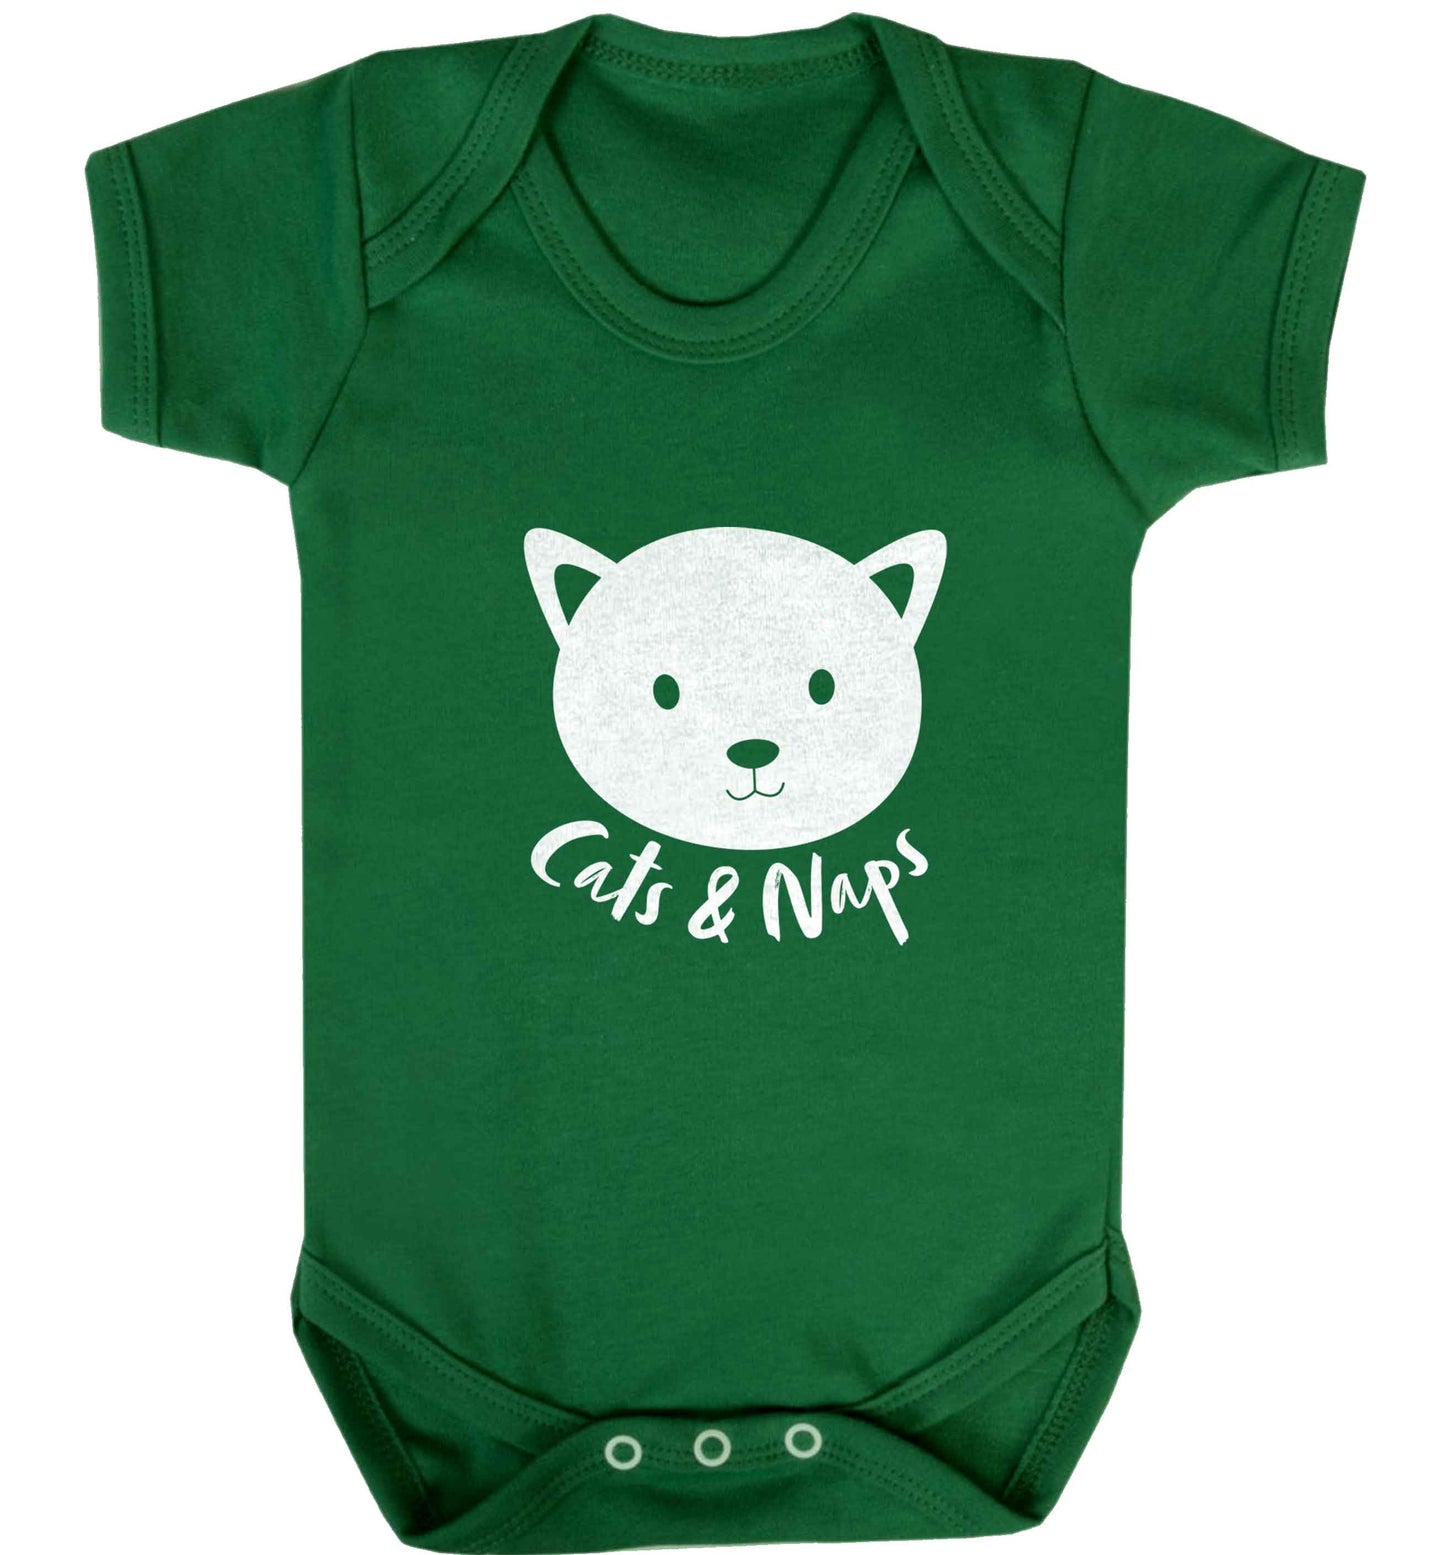 Cats and naps Kit baby vest green 18-24 months